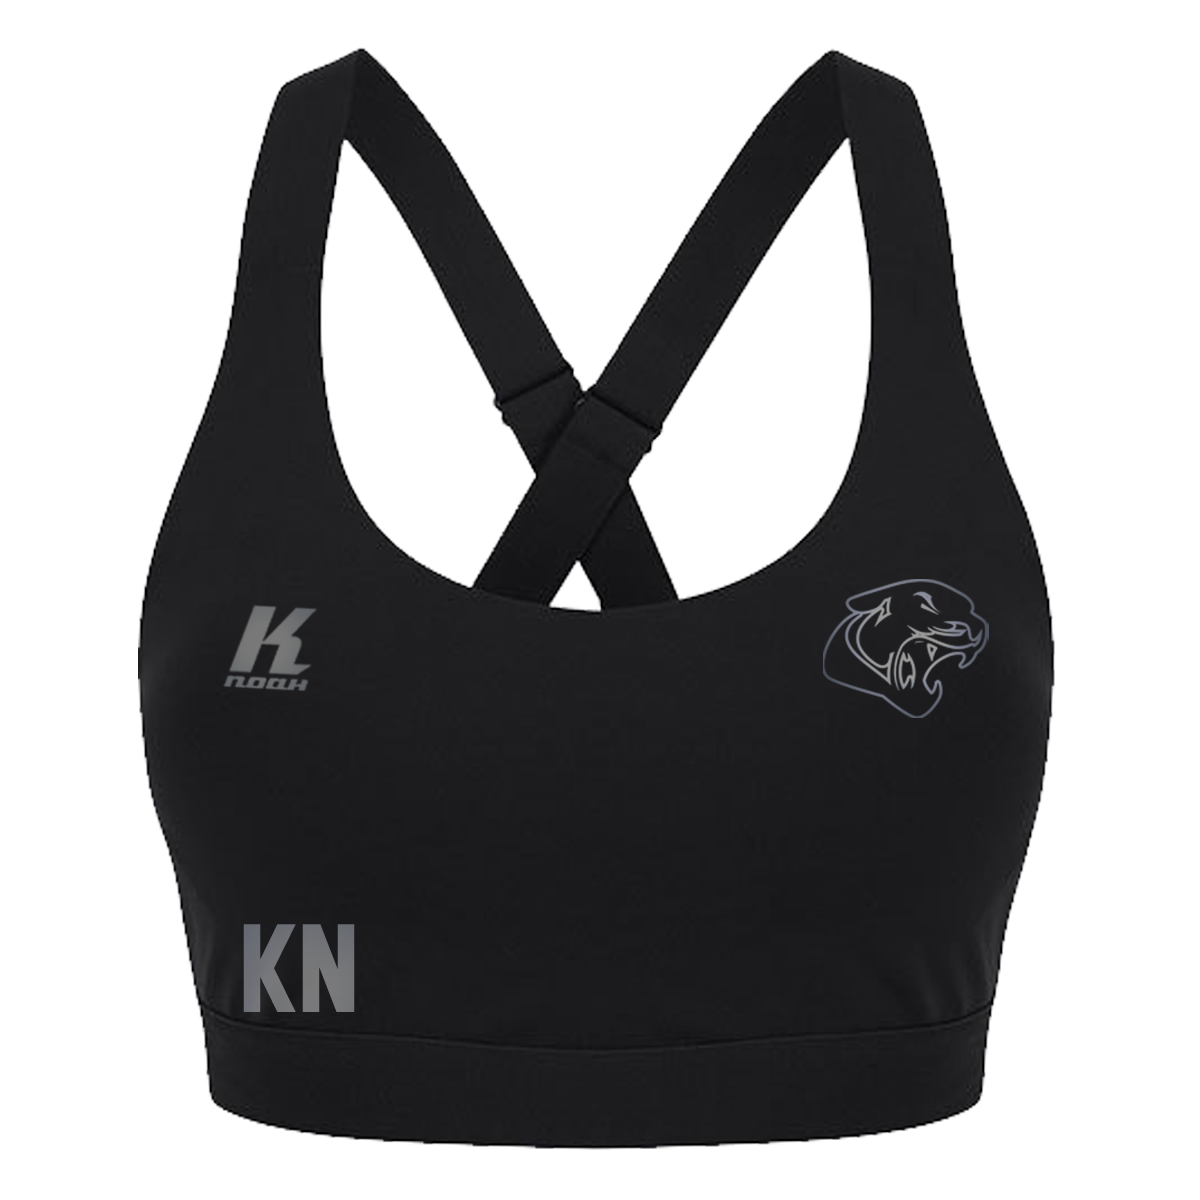 Cougars "Blackline" Womens Impact Core Bra TL371 with Initials/Playernumber